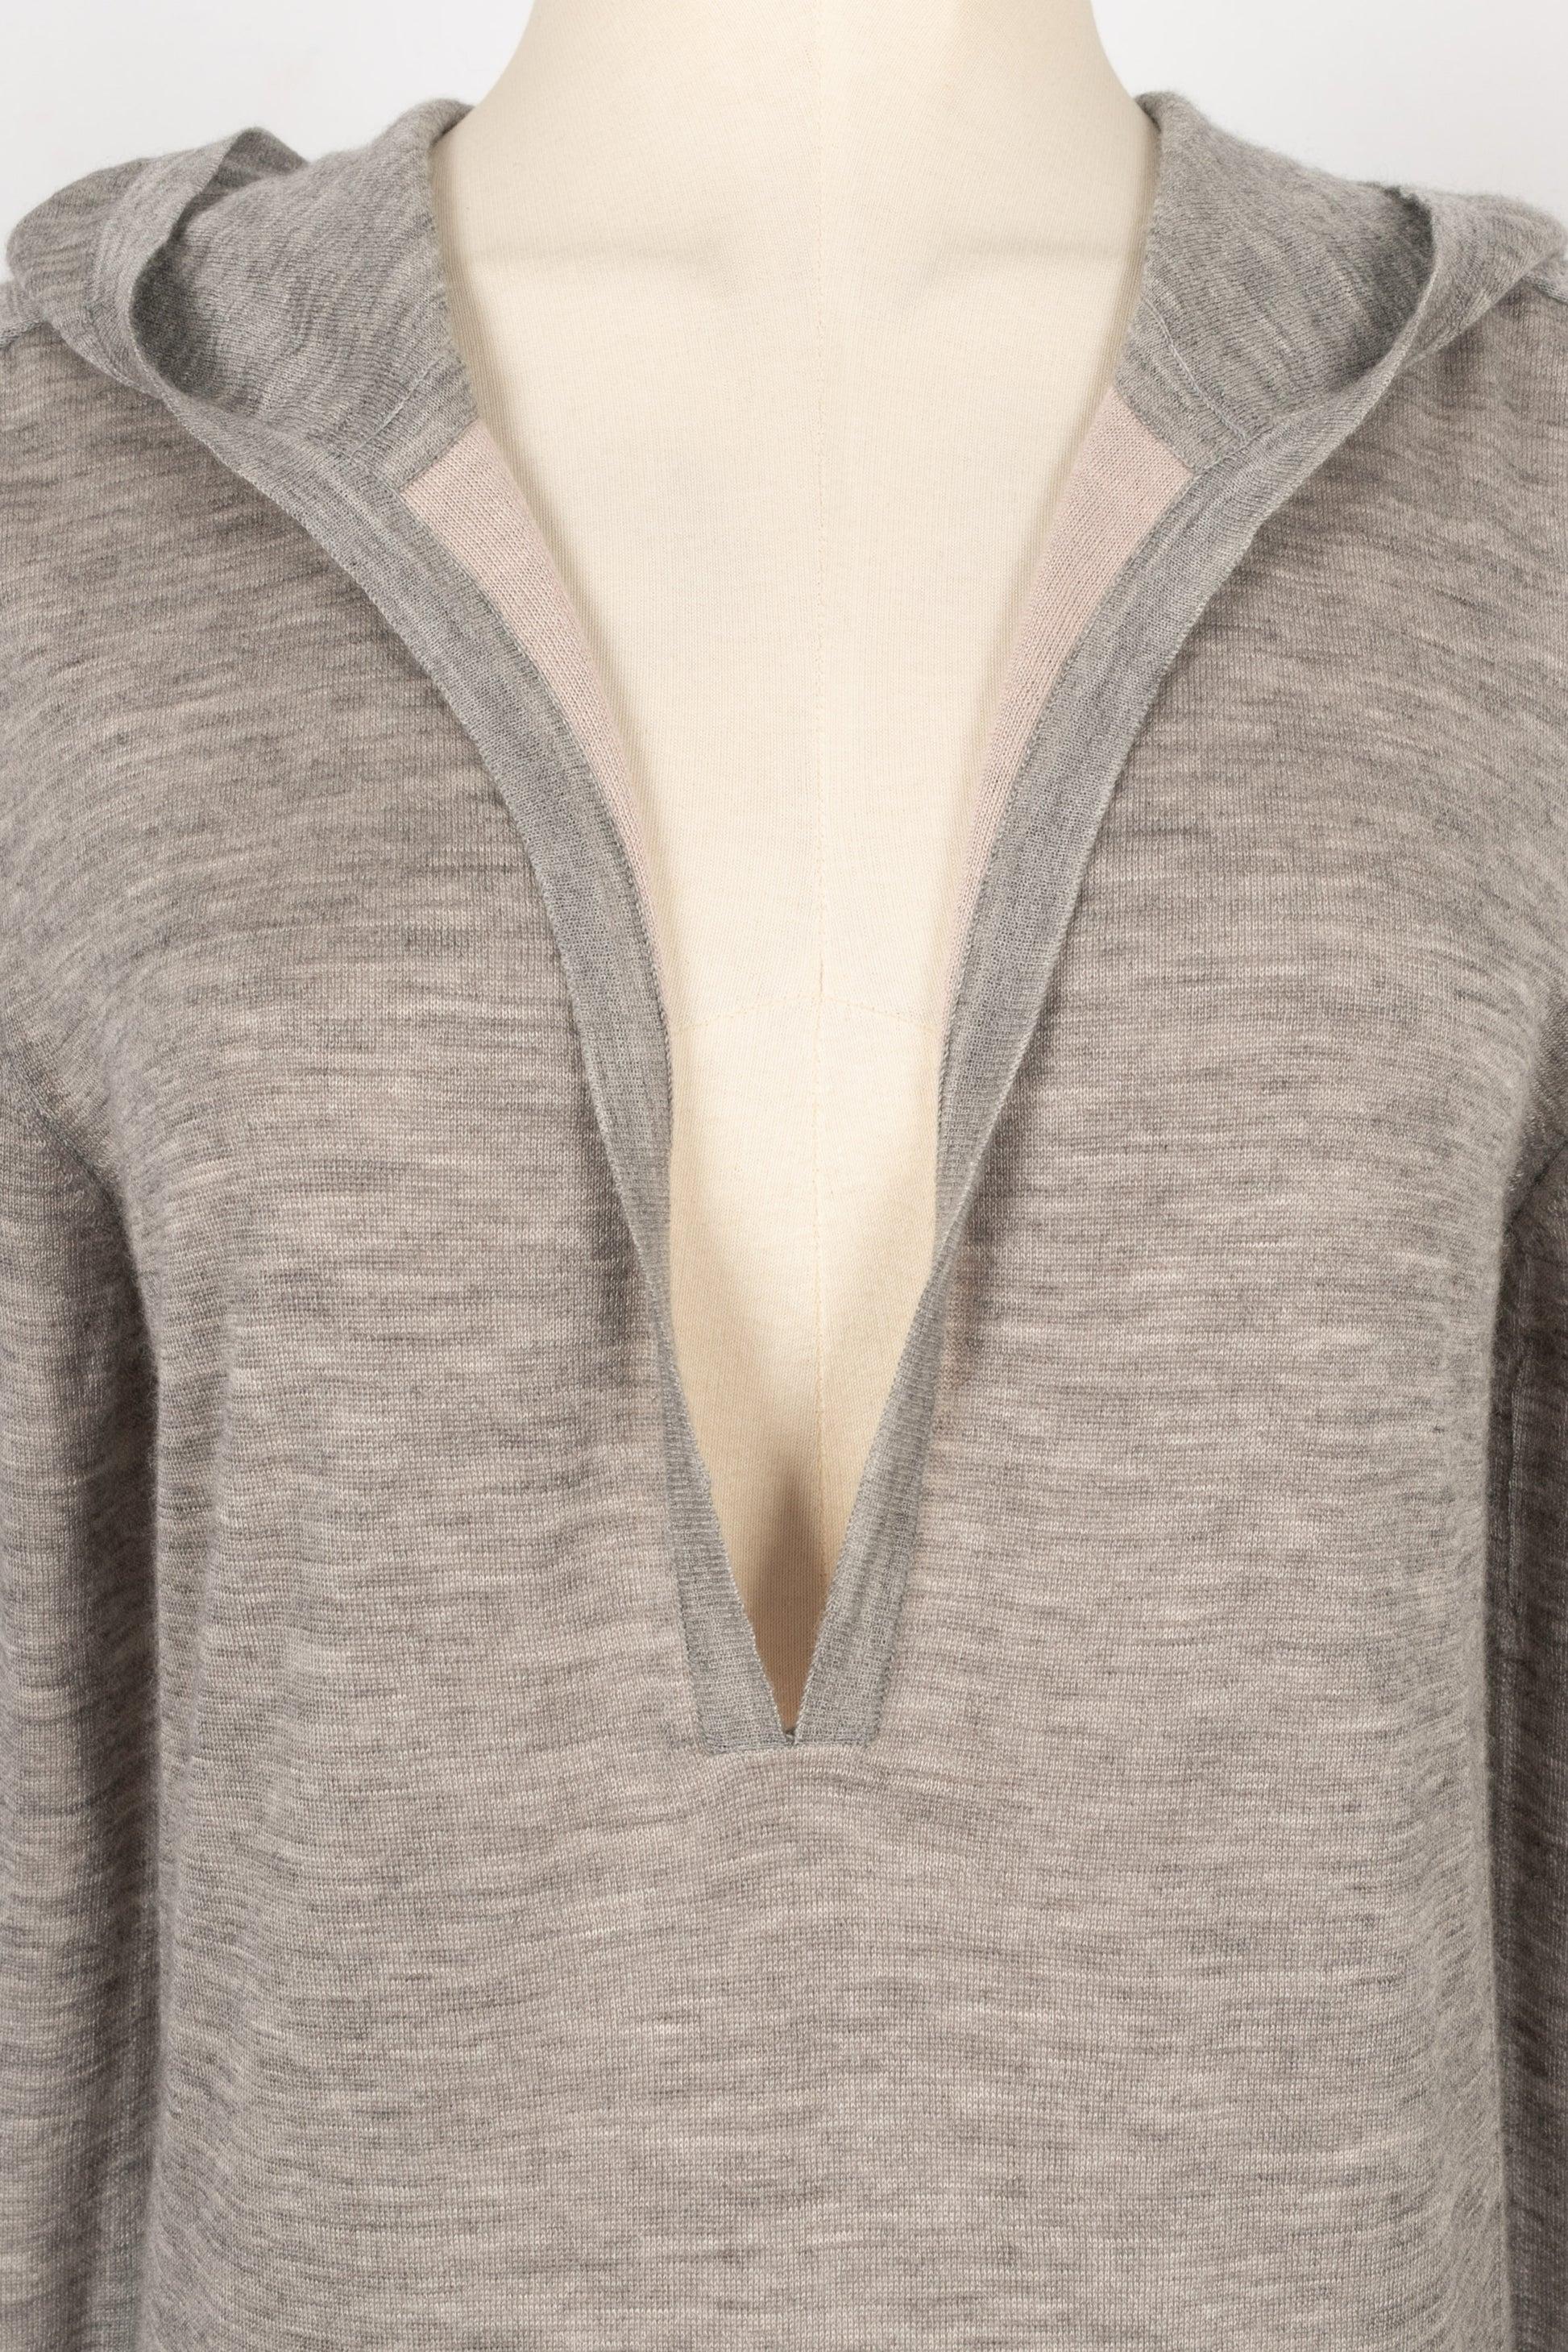 Women's Chanel Grey Cashmere Hooded Pullover Dress For Sale